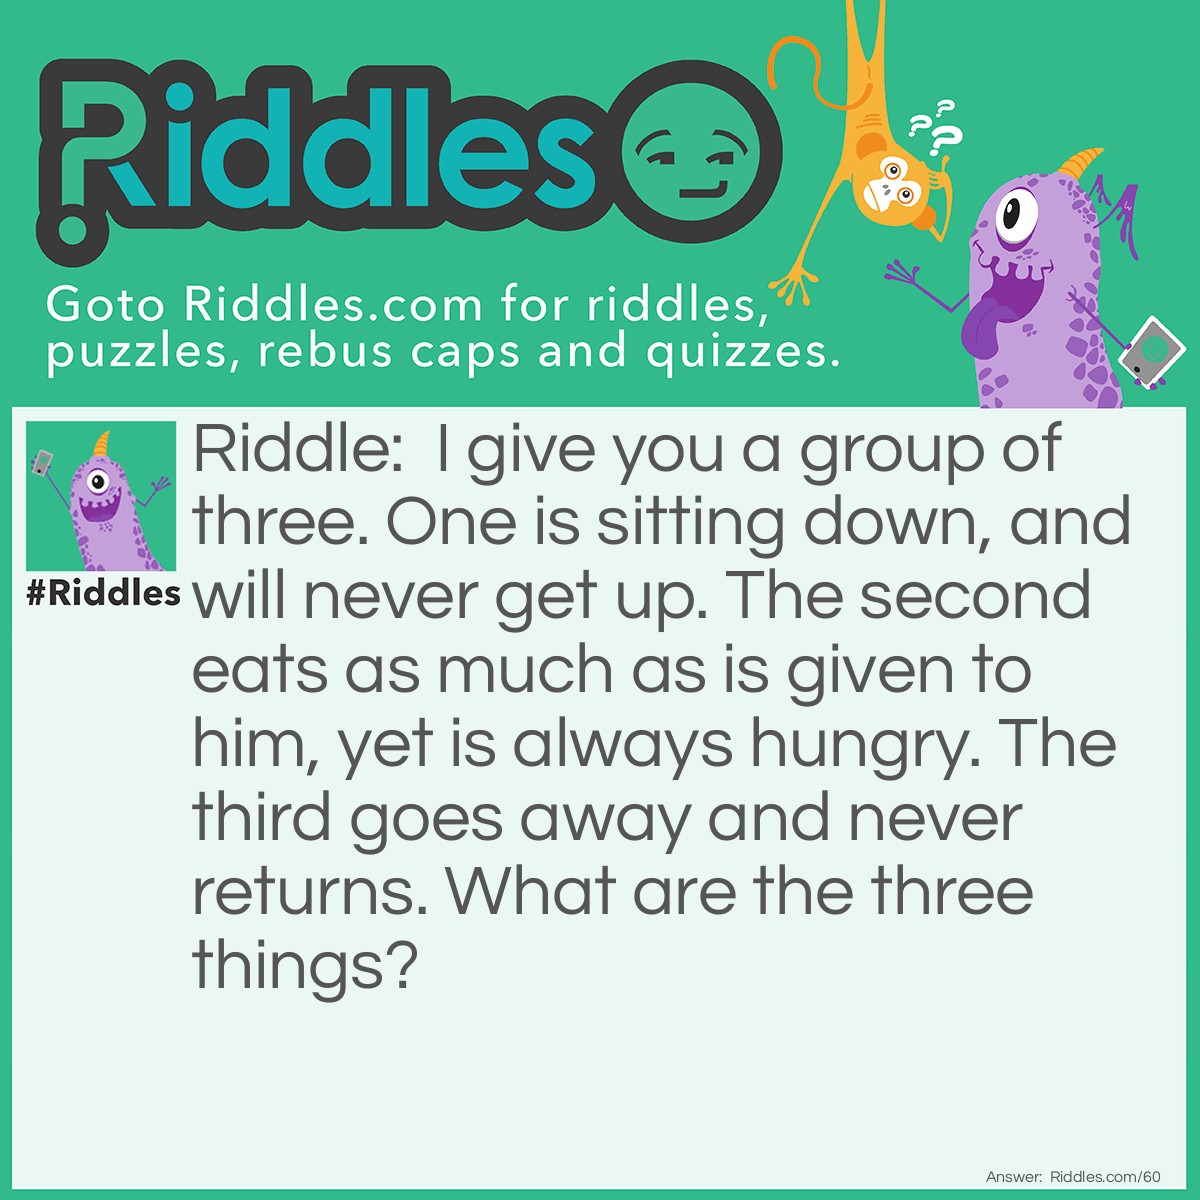 Riddle: I give you a group of three. One is sitting down, and will never get up. The second eats as much as is given to him, yet is always hungry. The third goes away and never returns. What are the three things? Answer: Stove, fire, and smoke.